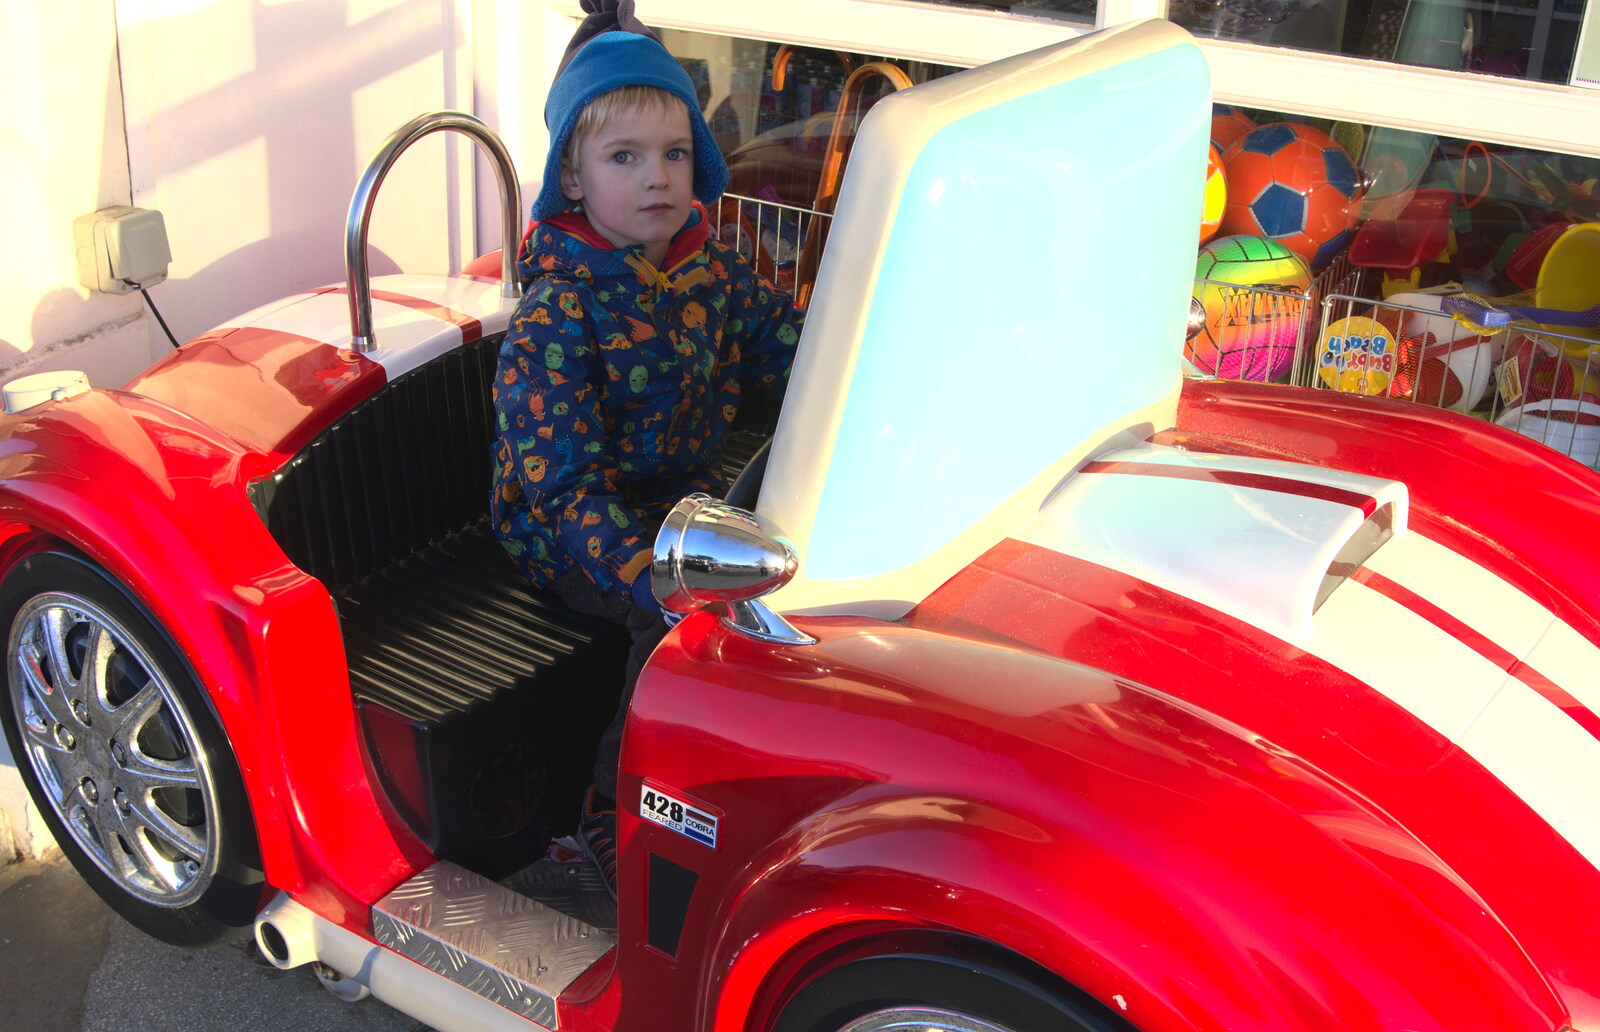 Harry in a toy car from Boxing Day in Southwold, Suffolk - 26th December 2016